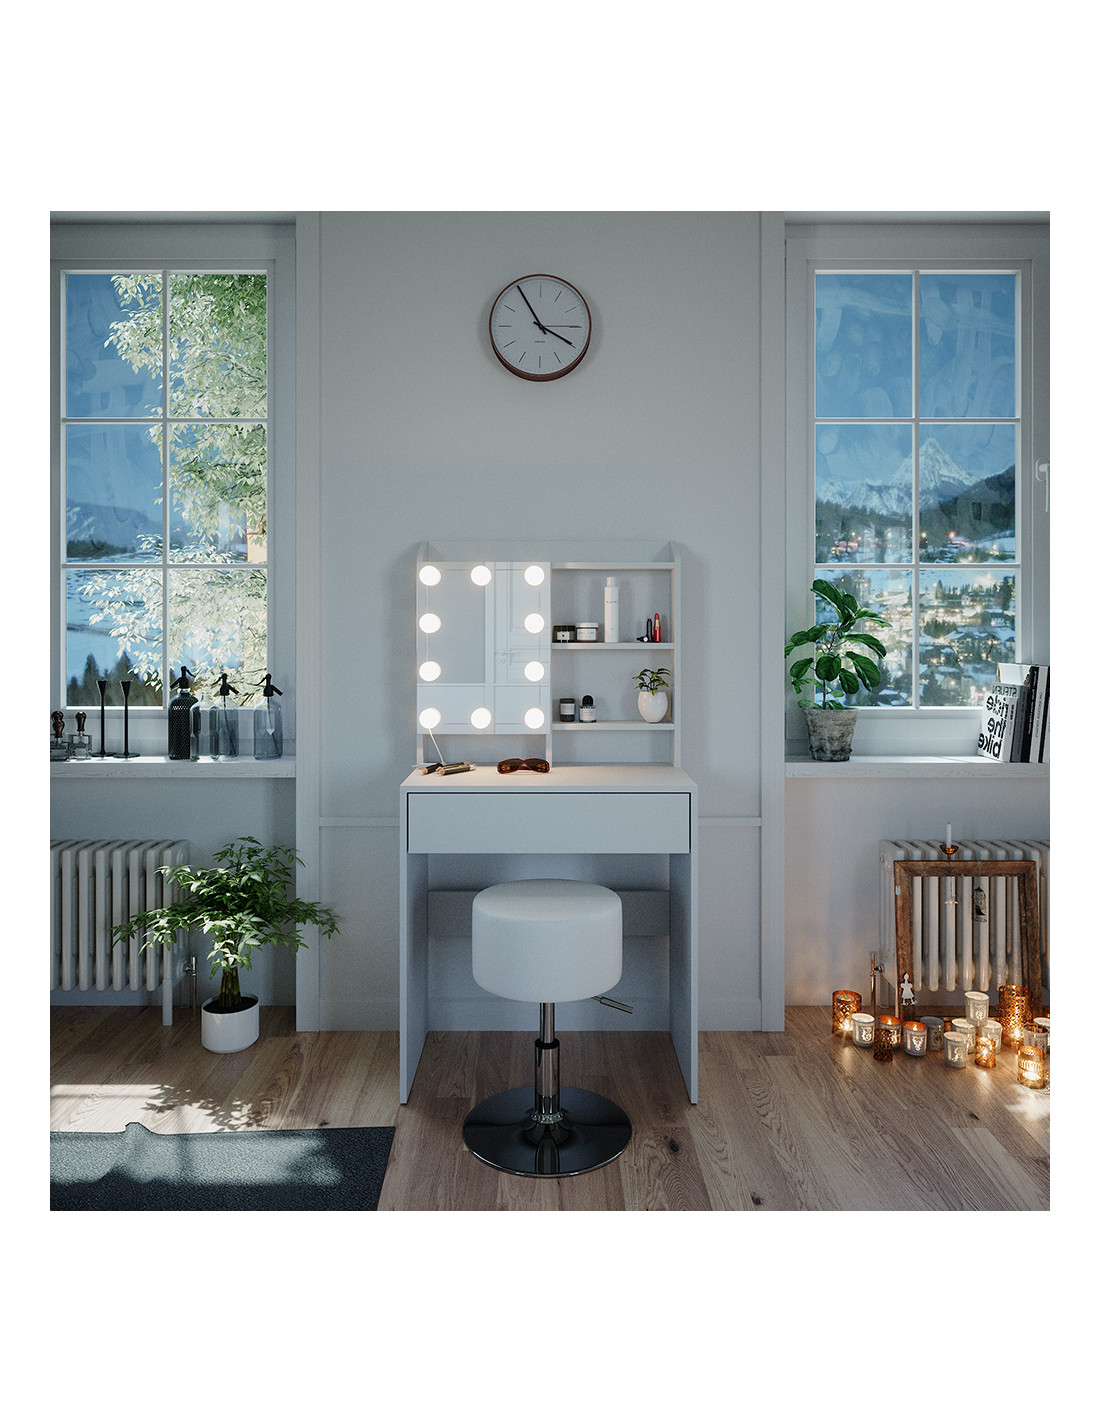 Coiffeuse d'angle blanche 6 tiroirs + LED + Tabouret Coiffeuse moderne -  Ciel & terre